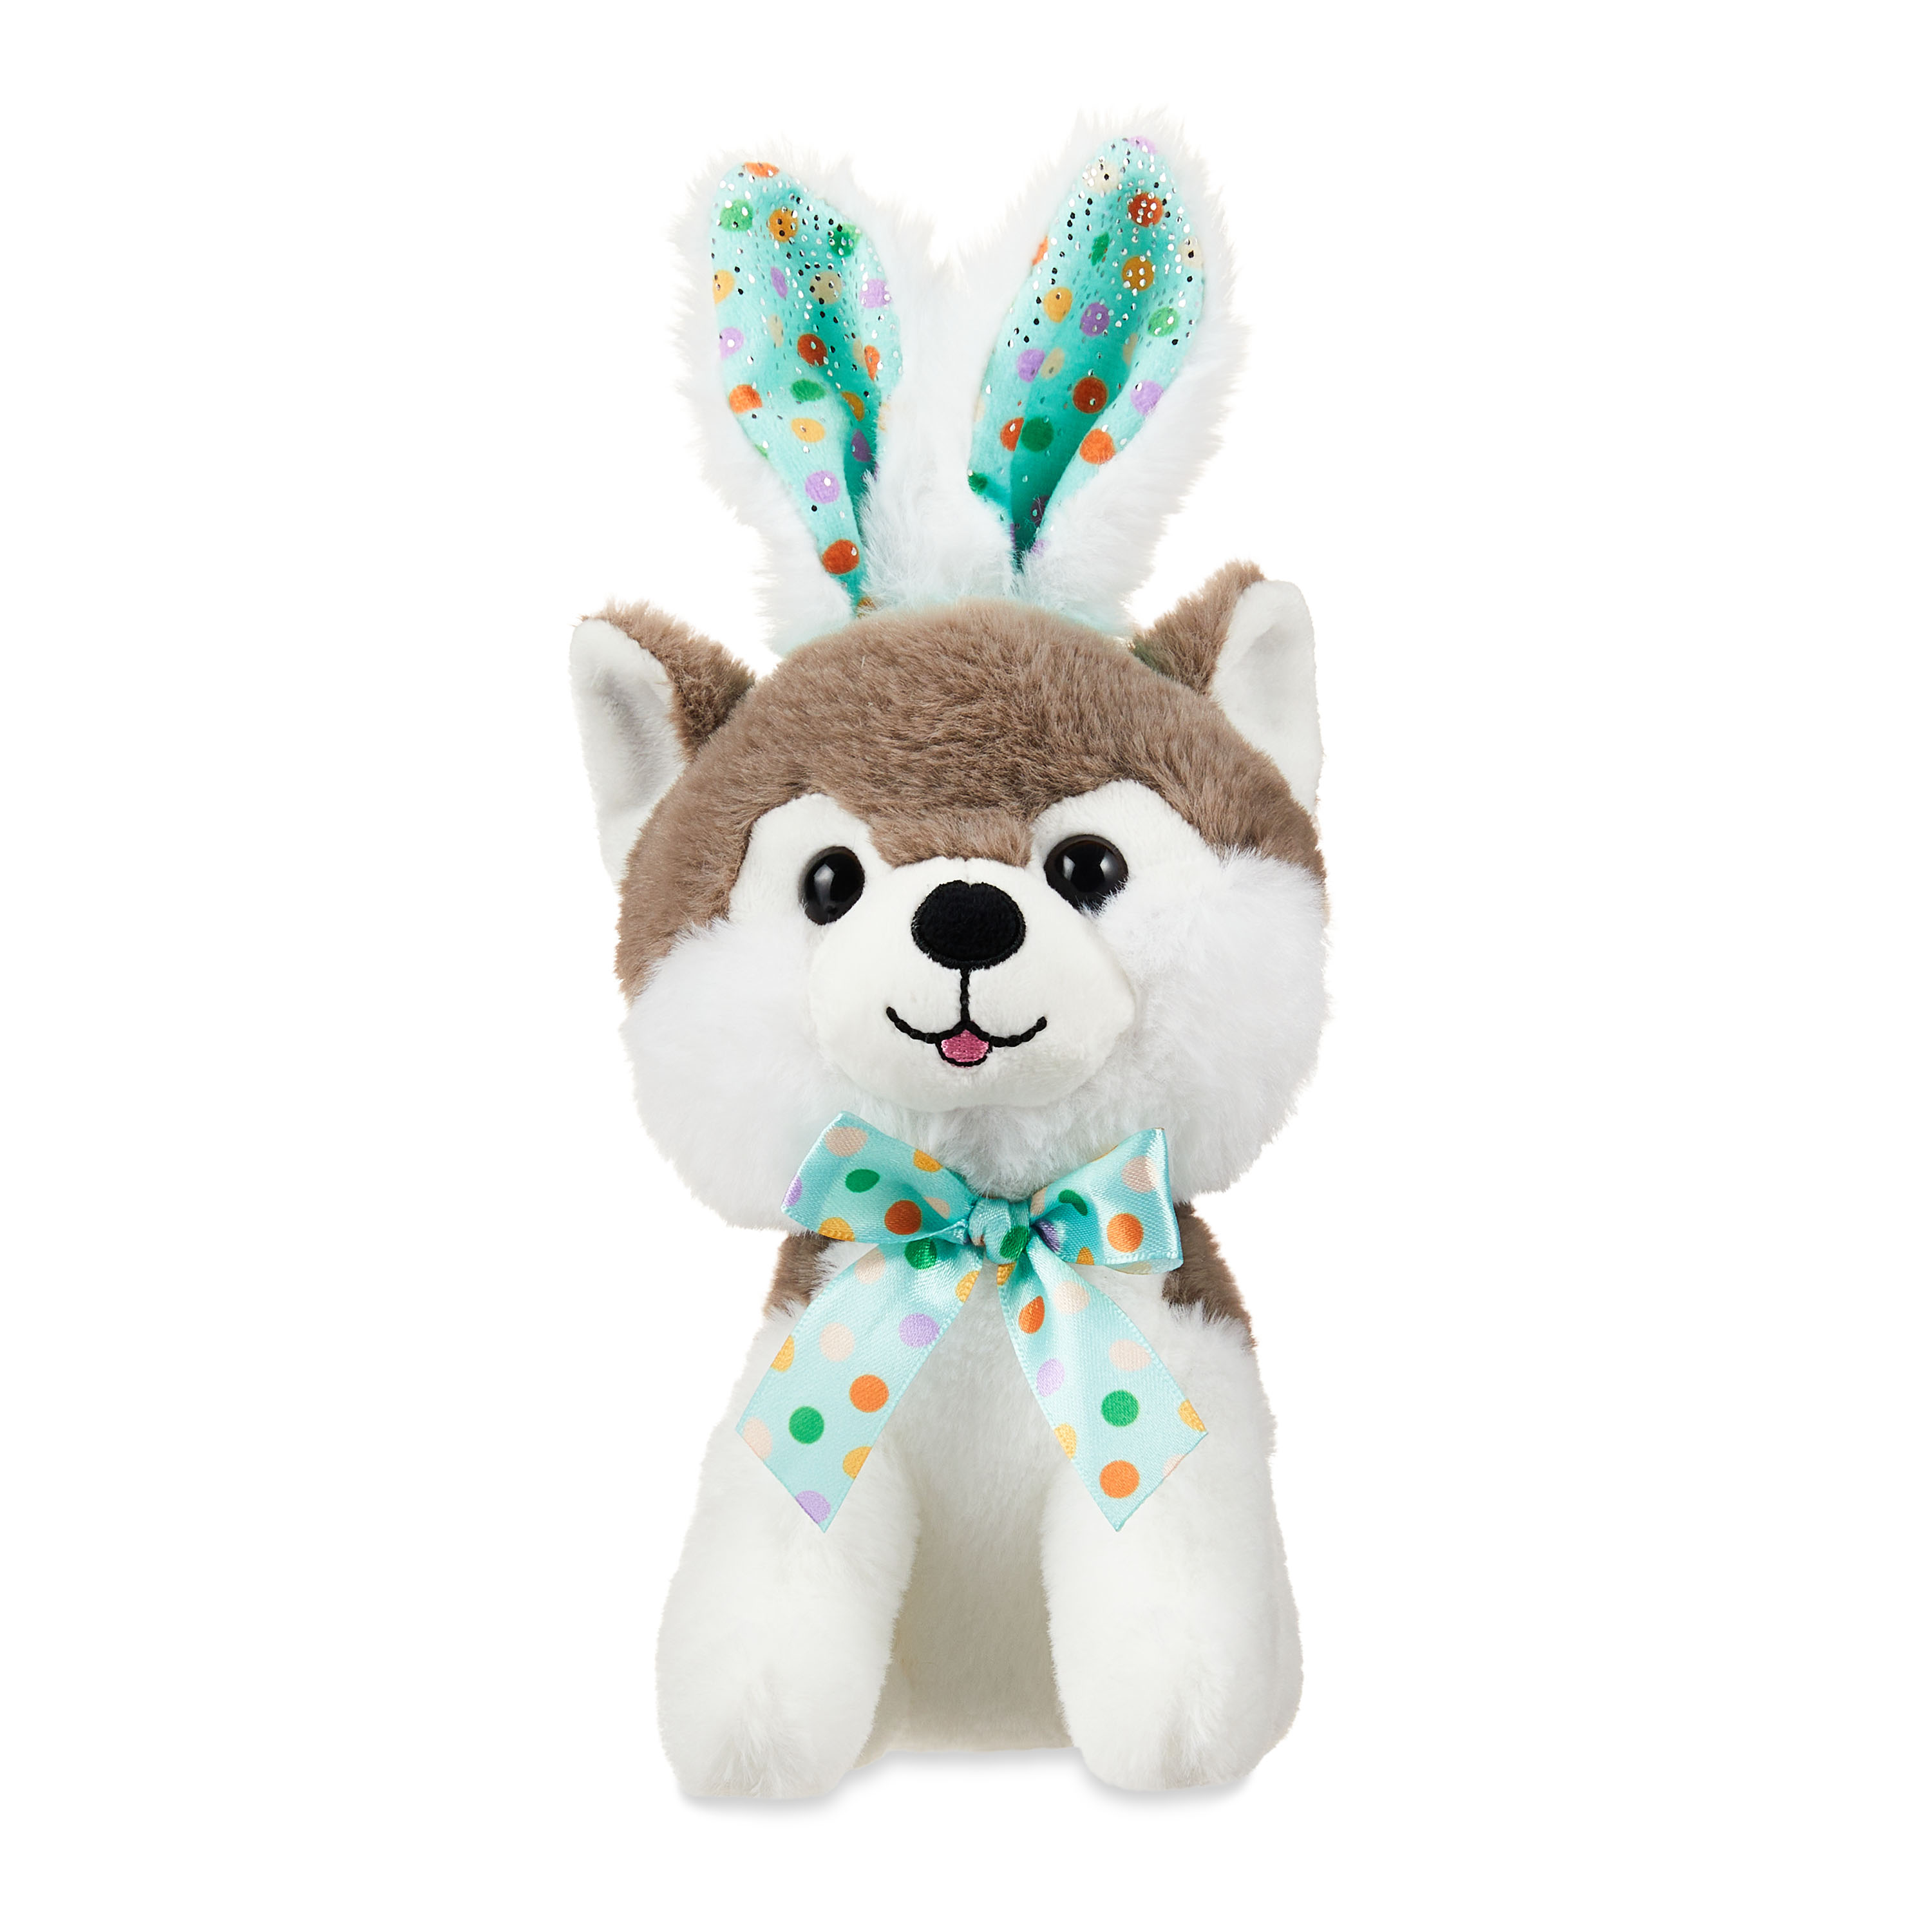 Easter Plush 7-inch Small Pup w/ Ears Grey , for 3 years up, Way To Celebrate - image 1 of 5